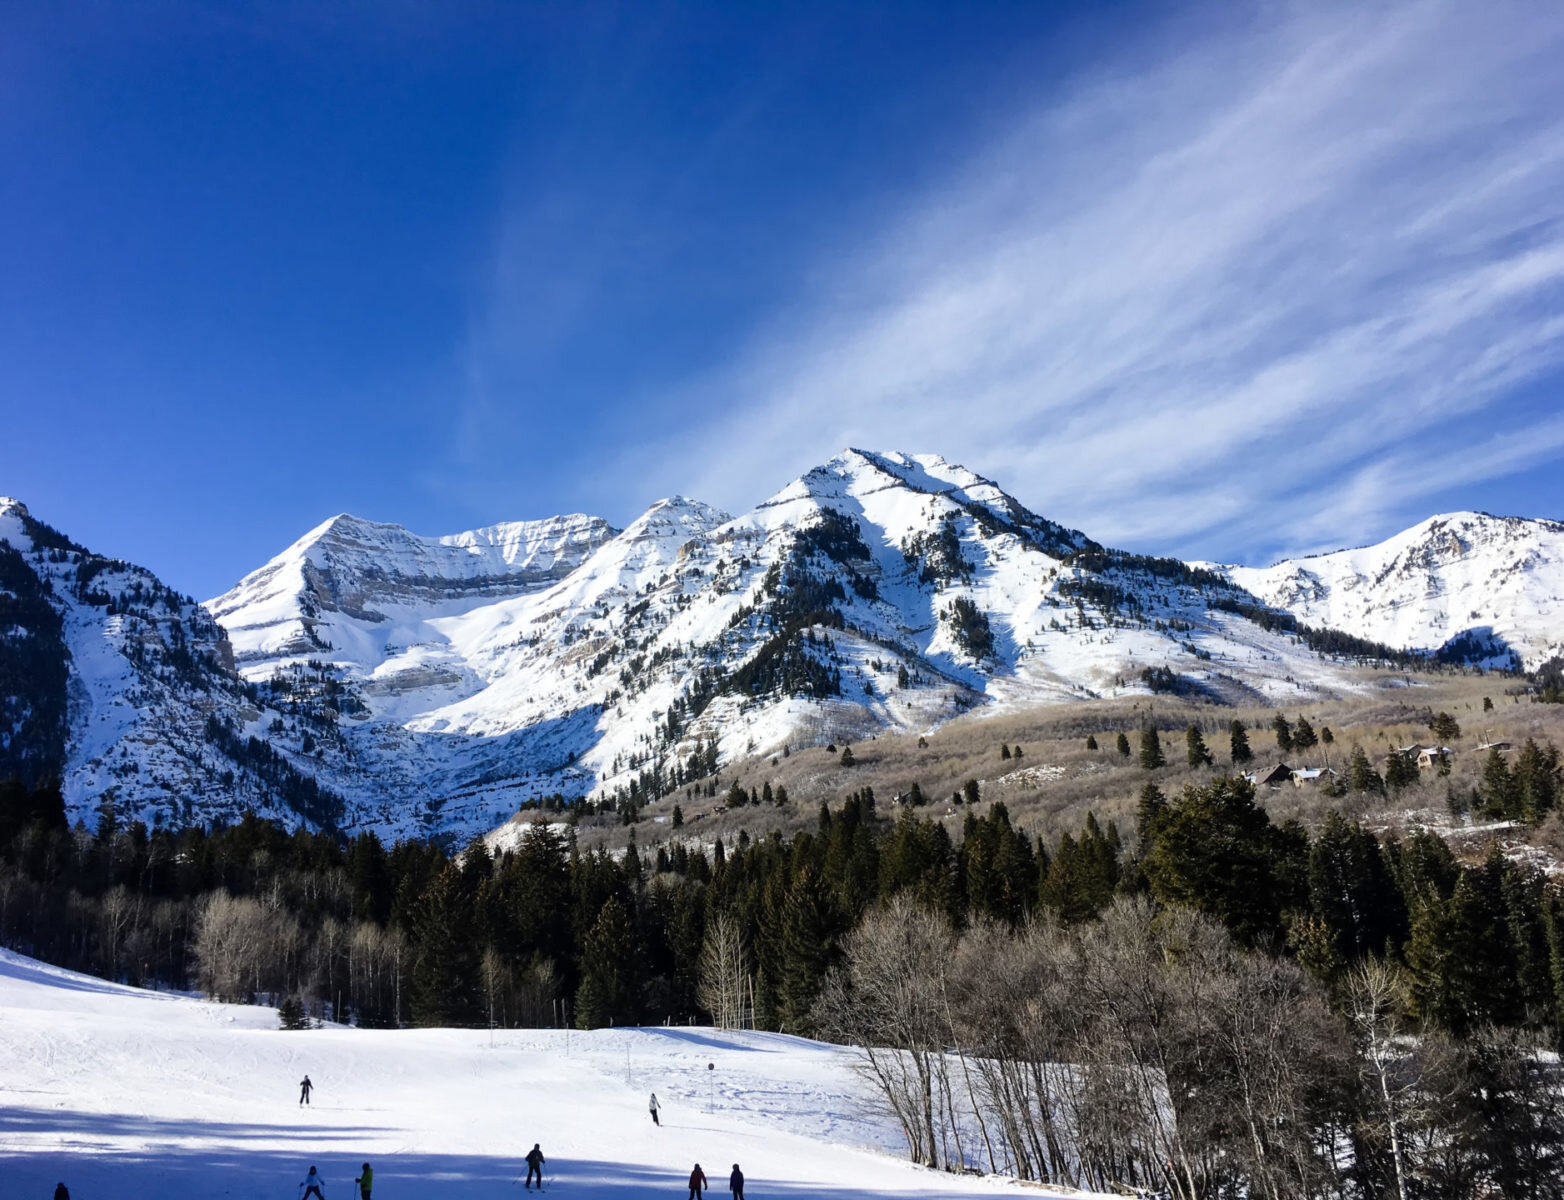 Guided Backcountry Skiing Adventures in Utah - The Greatest Snow on Earth